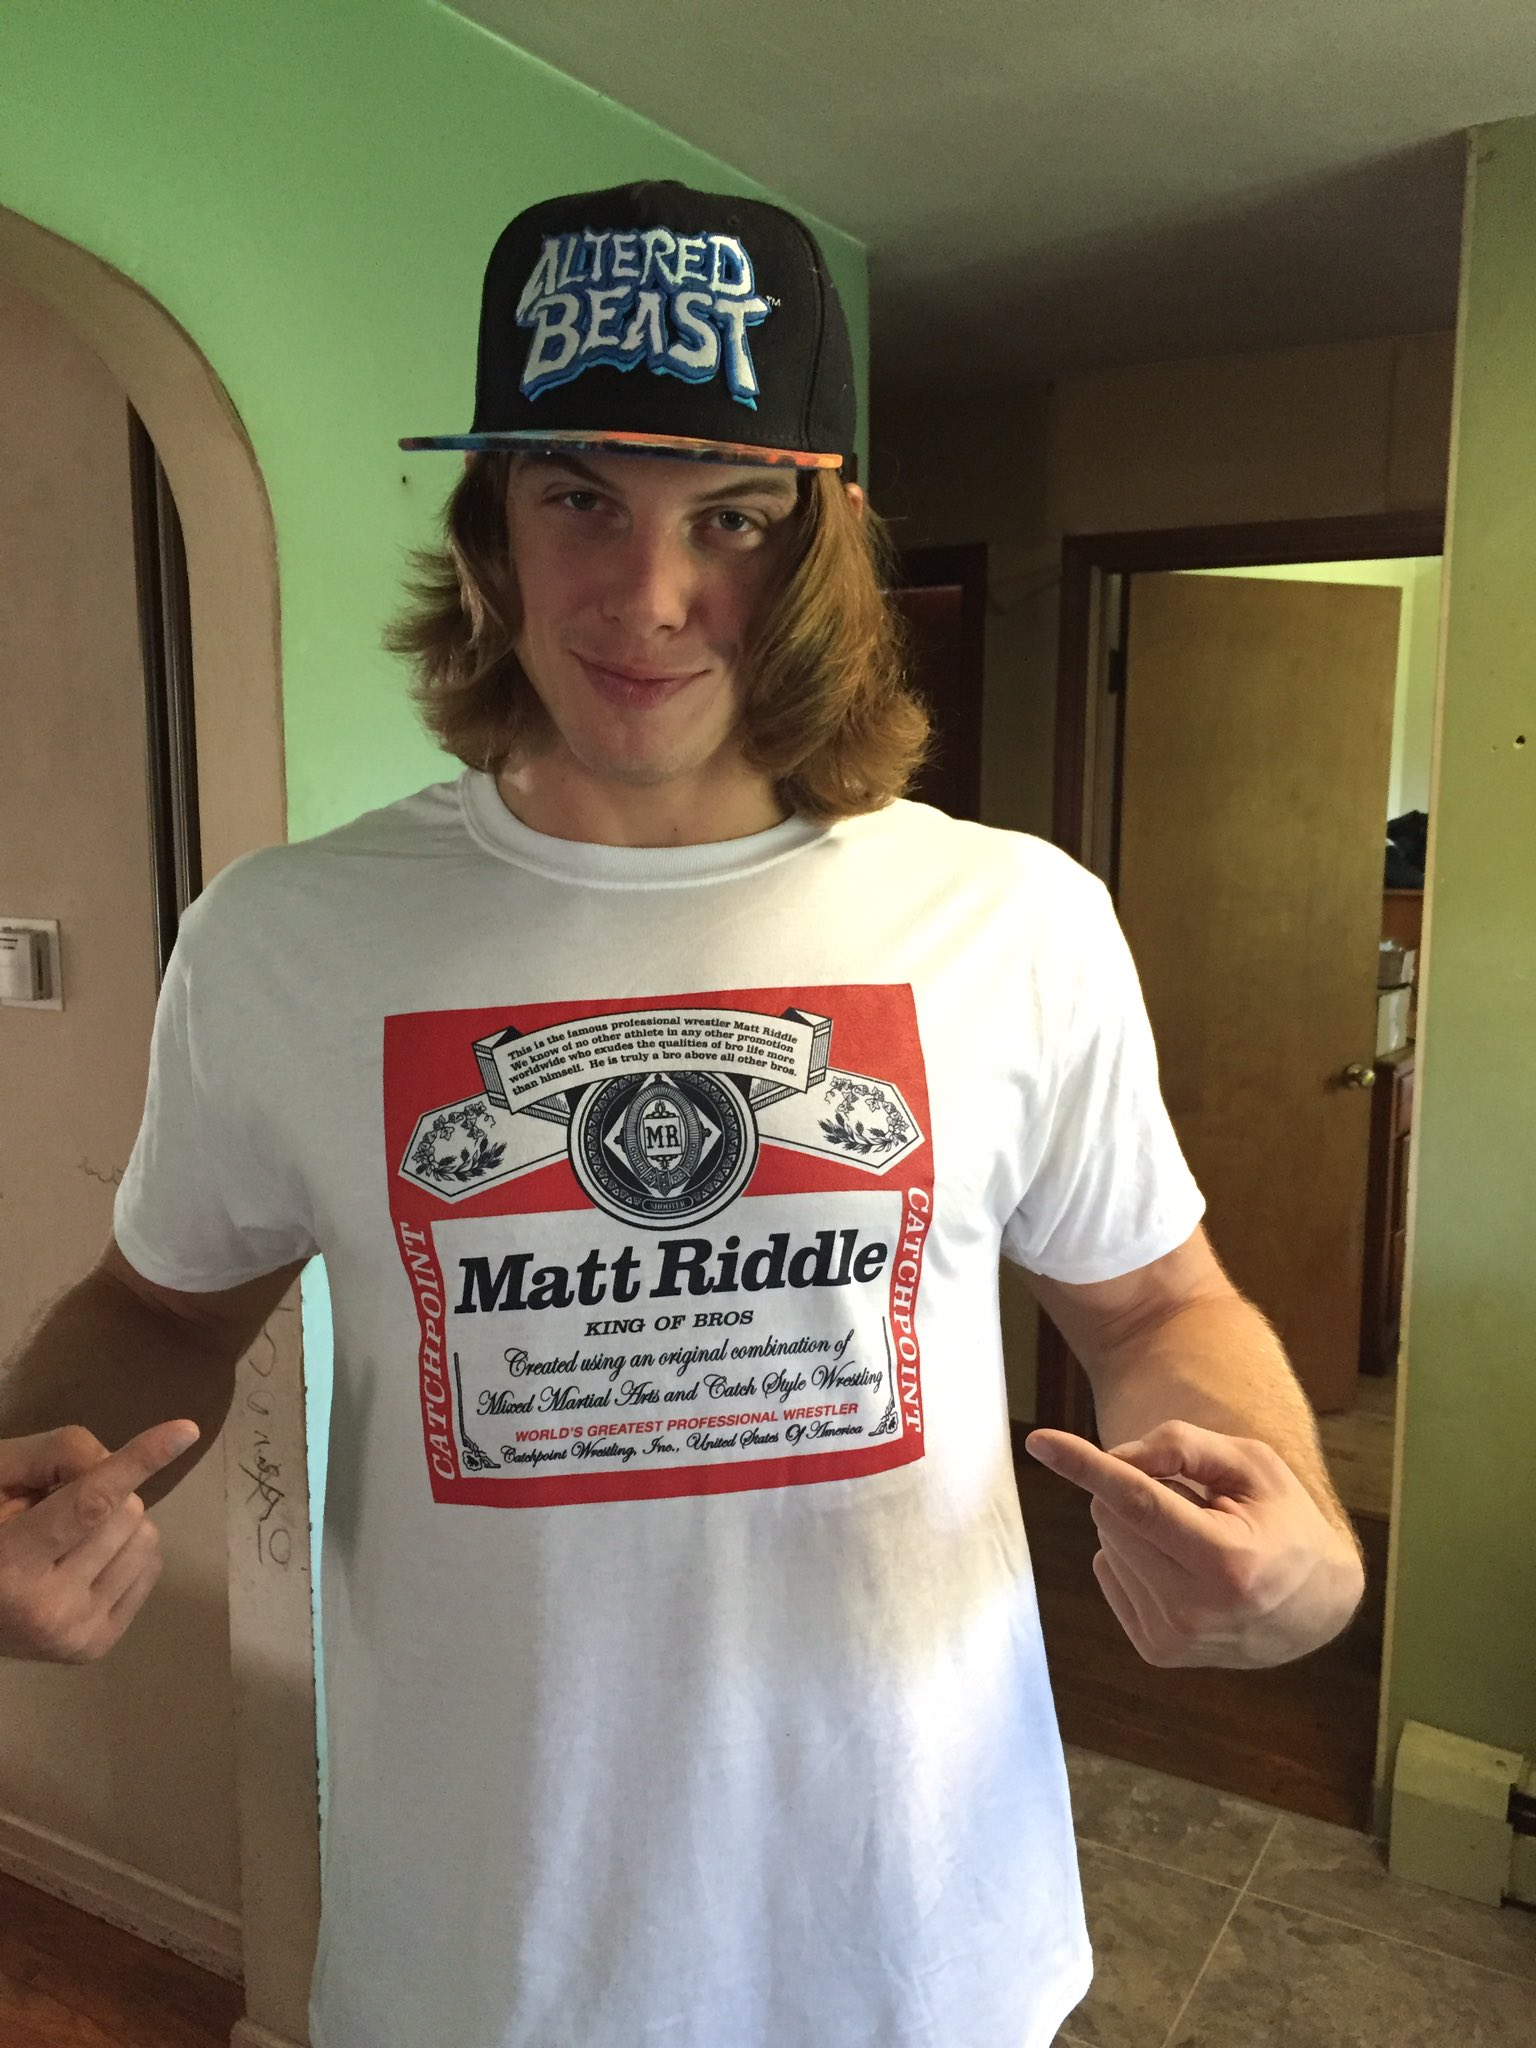 “The new Matt Riddle shirt has arrived and I can honestly say that &quo...